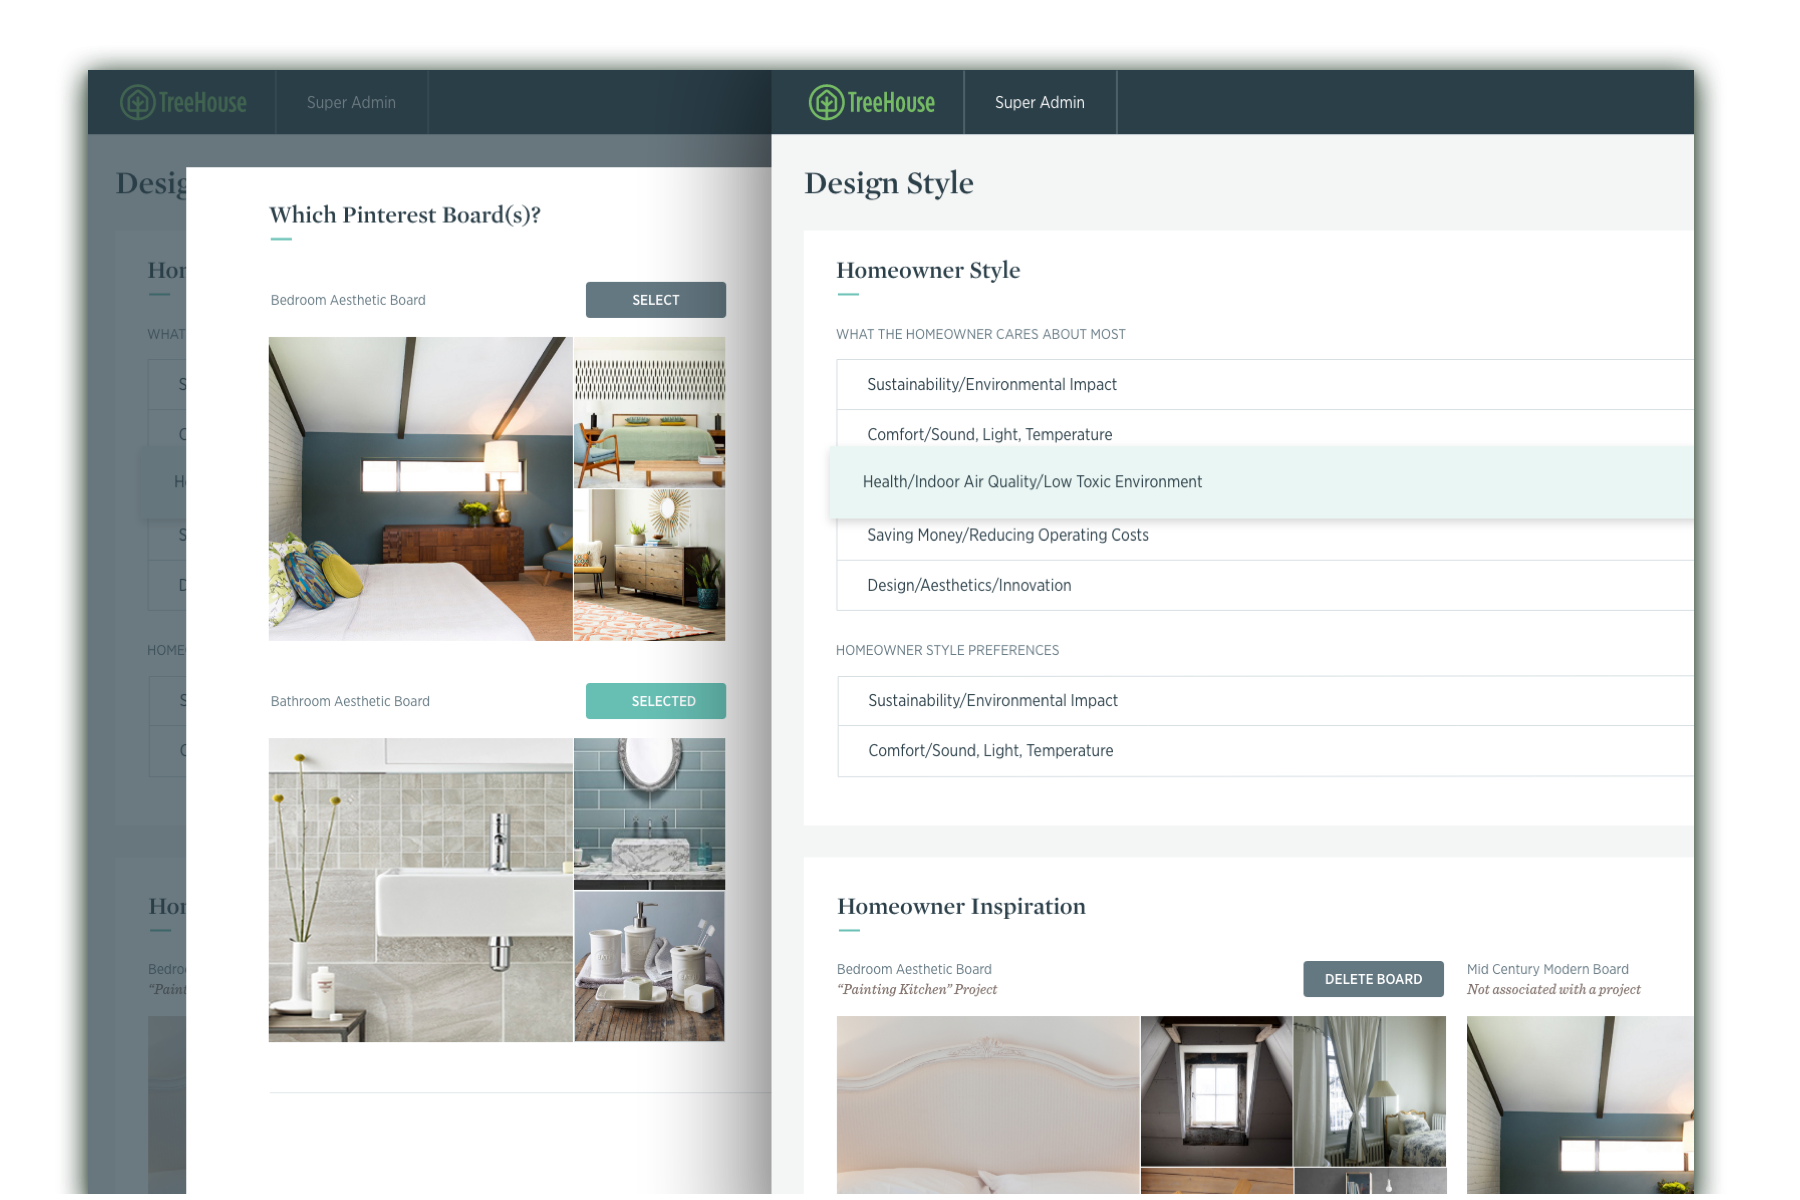 two overlapping interface screenshots of a Treehouse branded desktop and tablet interface.